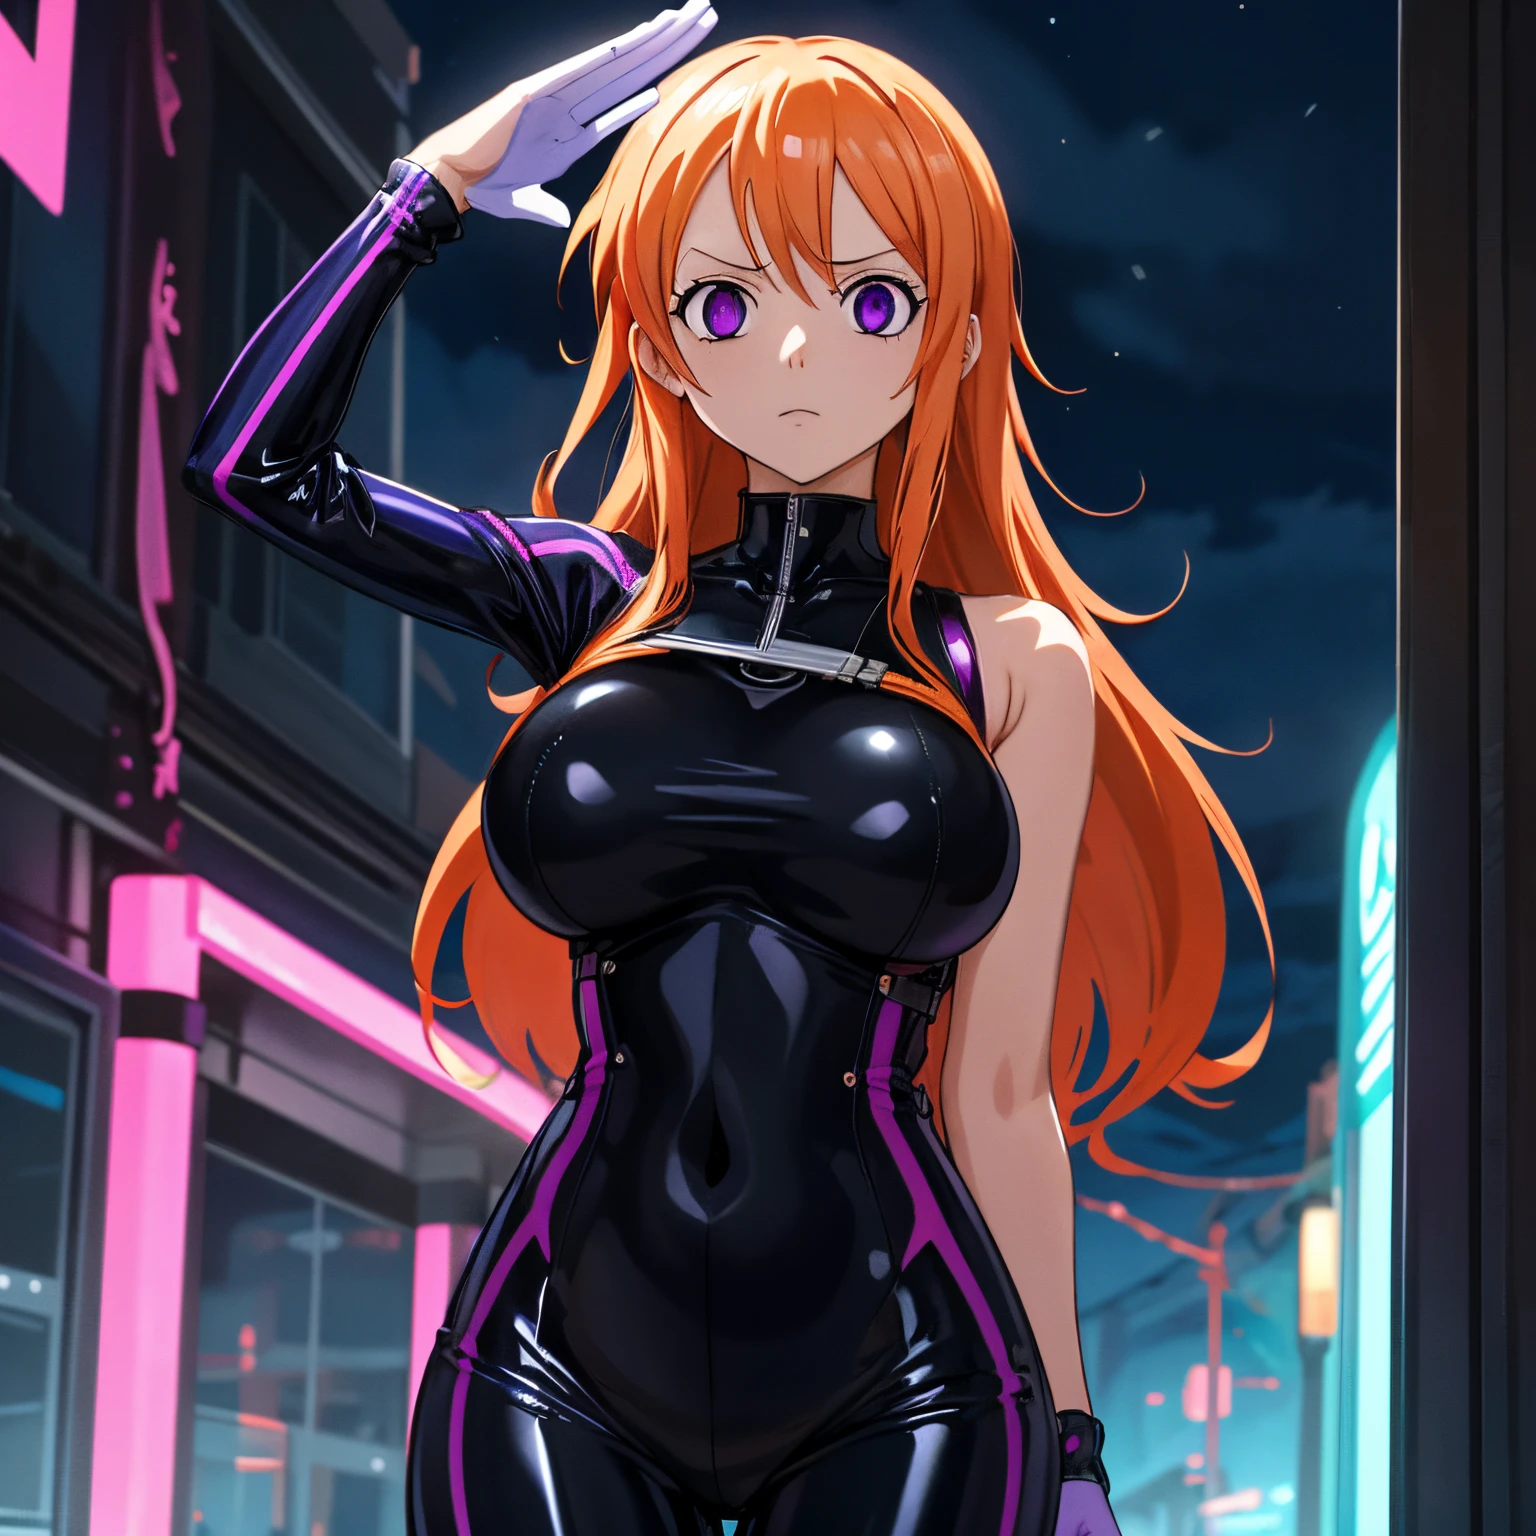 {1girl in},{{{{{masutepiece++, Best Quality++, Ultra-detailed+, 超A high resolution,(Photorealistic:1.4),Raw photo,(Nami)+,(Nami)+,(One Piece NAMI)+,(Onepiece),Orange hair, Girl in black latex full body suit,very aesthetic, Best Quality, absurderes, Brainwashed,}}}}}, ((purple glowing eyes 1.3)), (huge-breasted:1.2)deadpan, laboratory, Darkness Room, (Neon light:1.2), (Night:1.5), stand up and salute